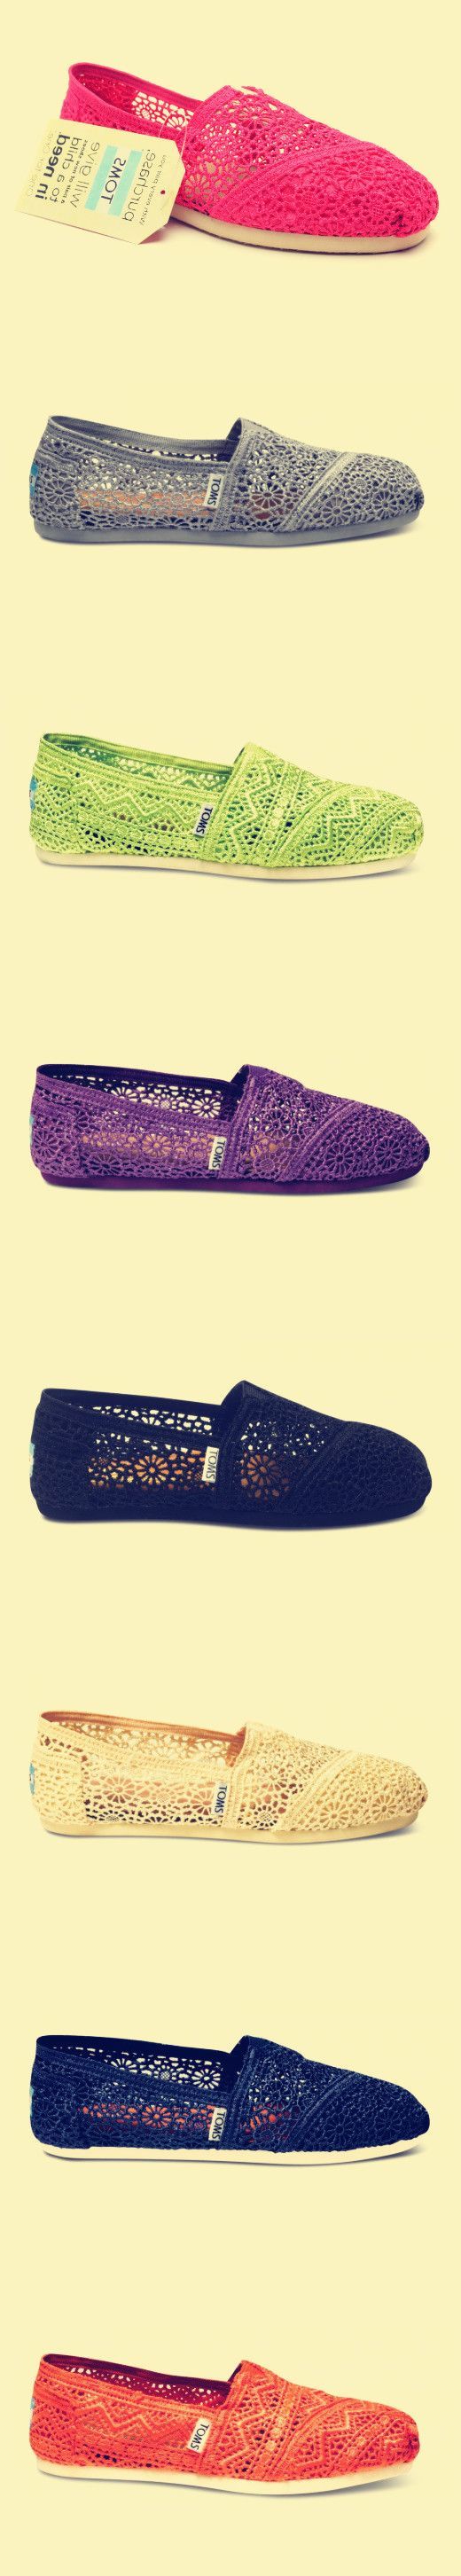 Fashion and Such / Toms Outlet! $26.99 OMG!! Holy cow, Im gonna love this